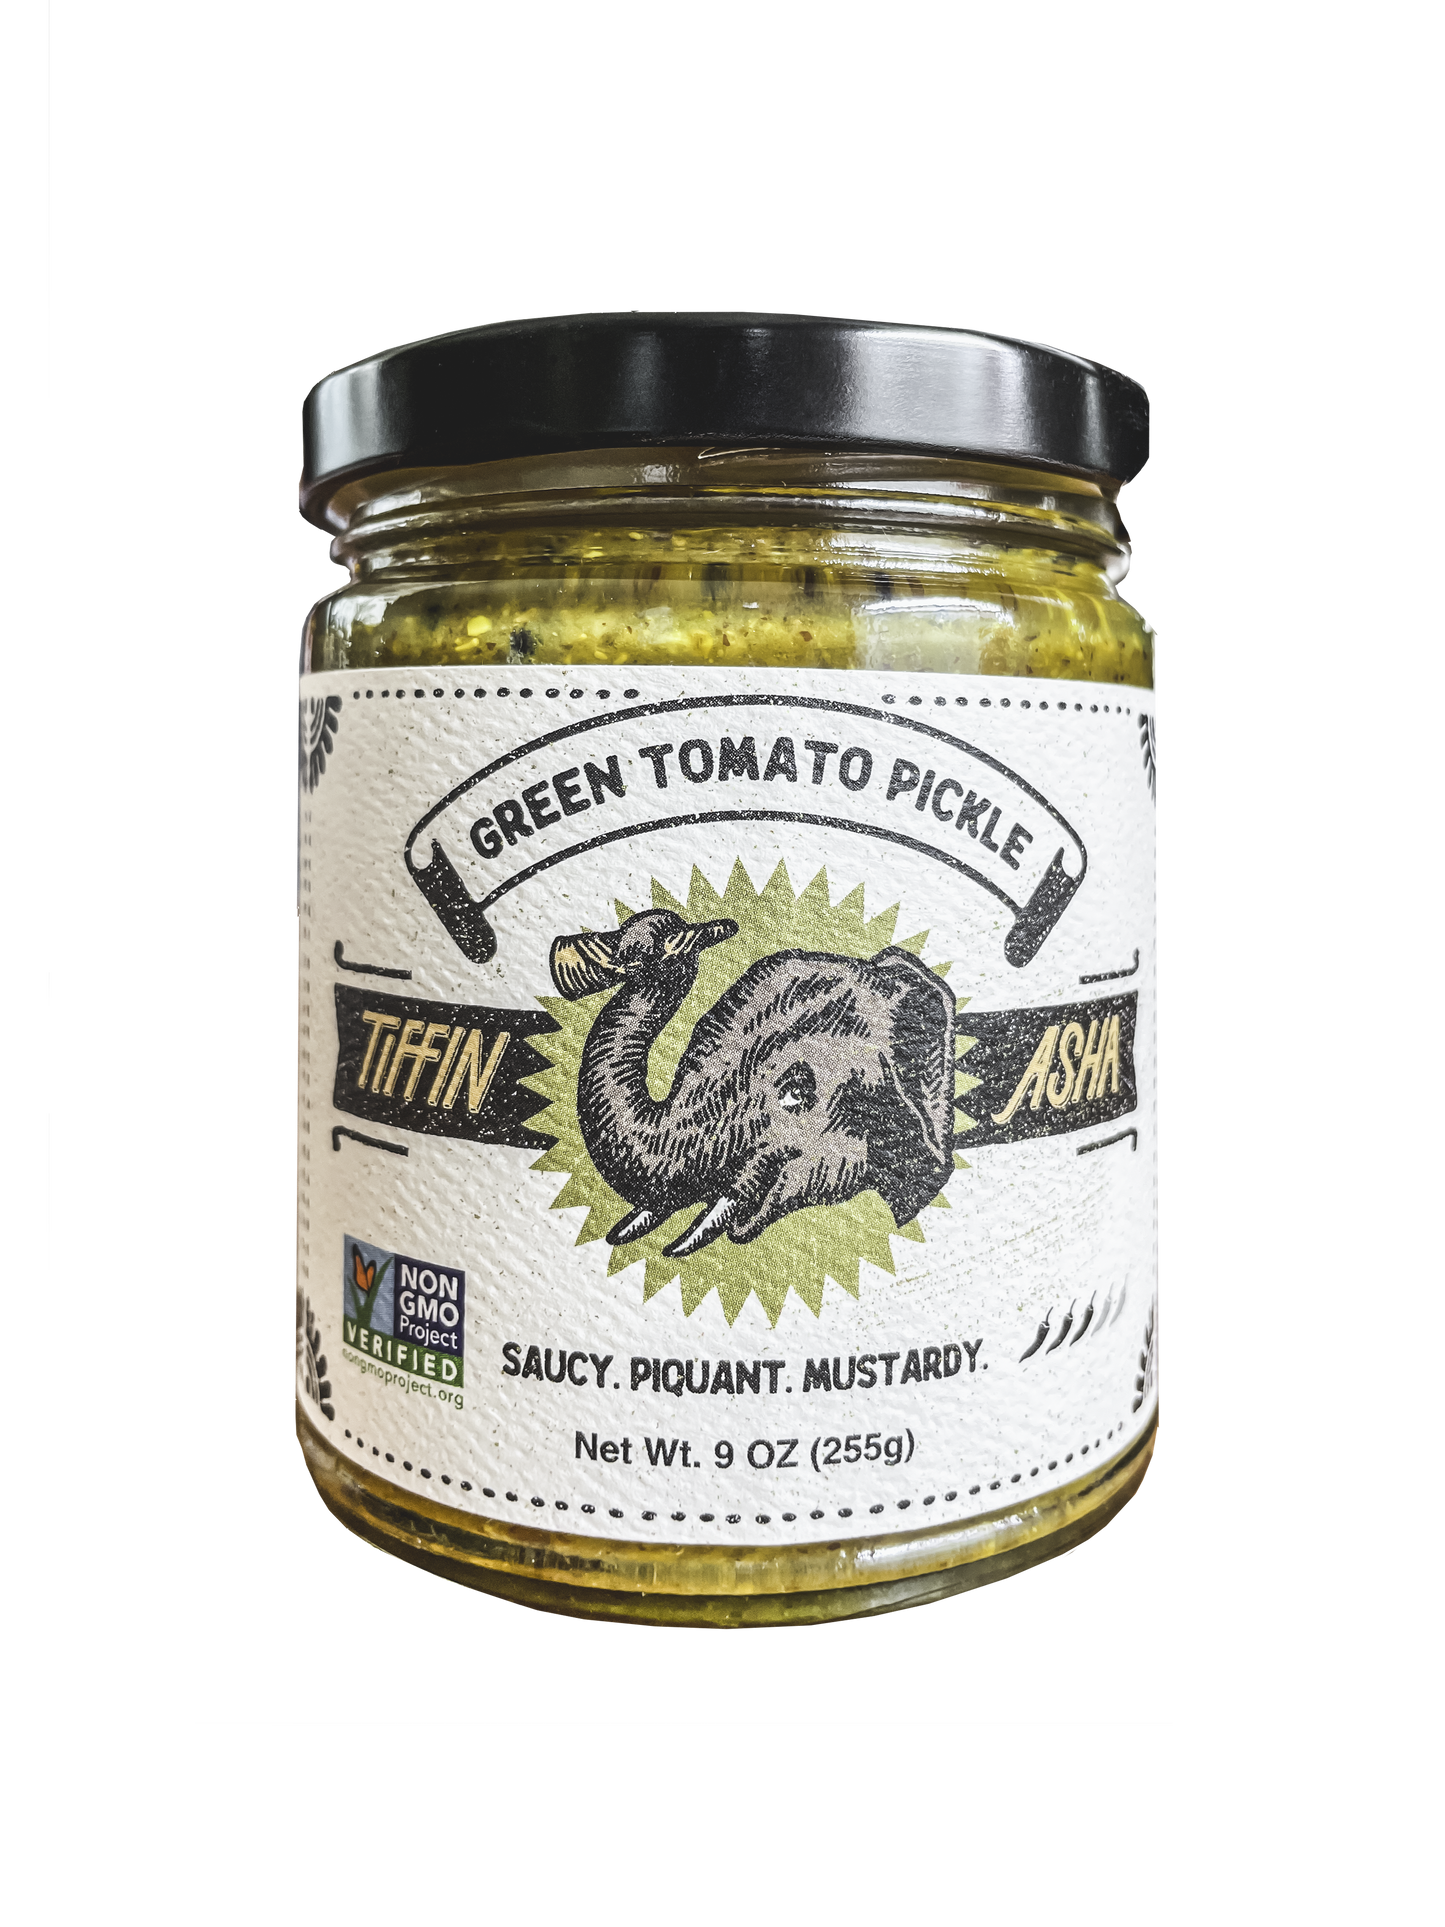 9 oz glass jar with black lid. Label reads: Tiffin Asha, with an elephant head and its trunk holding a dosa, green tomato pickle, NON GMO project VERIFIED, tasting notes read: saucy, piquant, mustardy, shows 3 chili peppers for heat level.